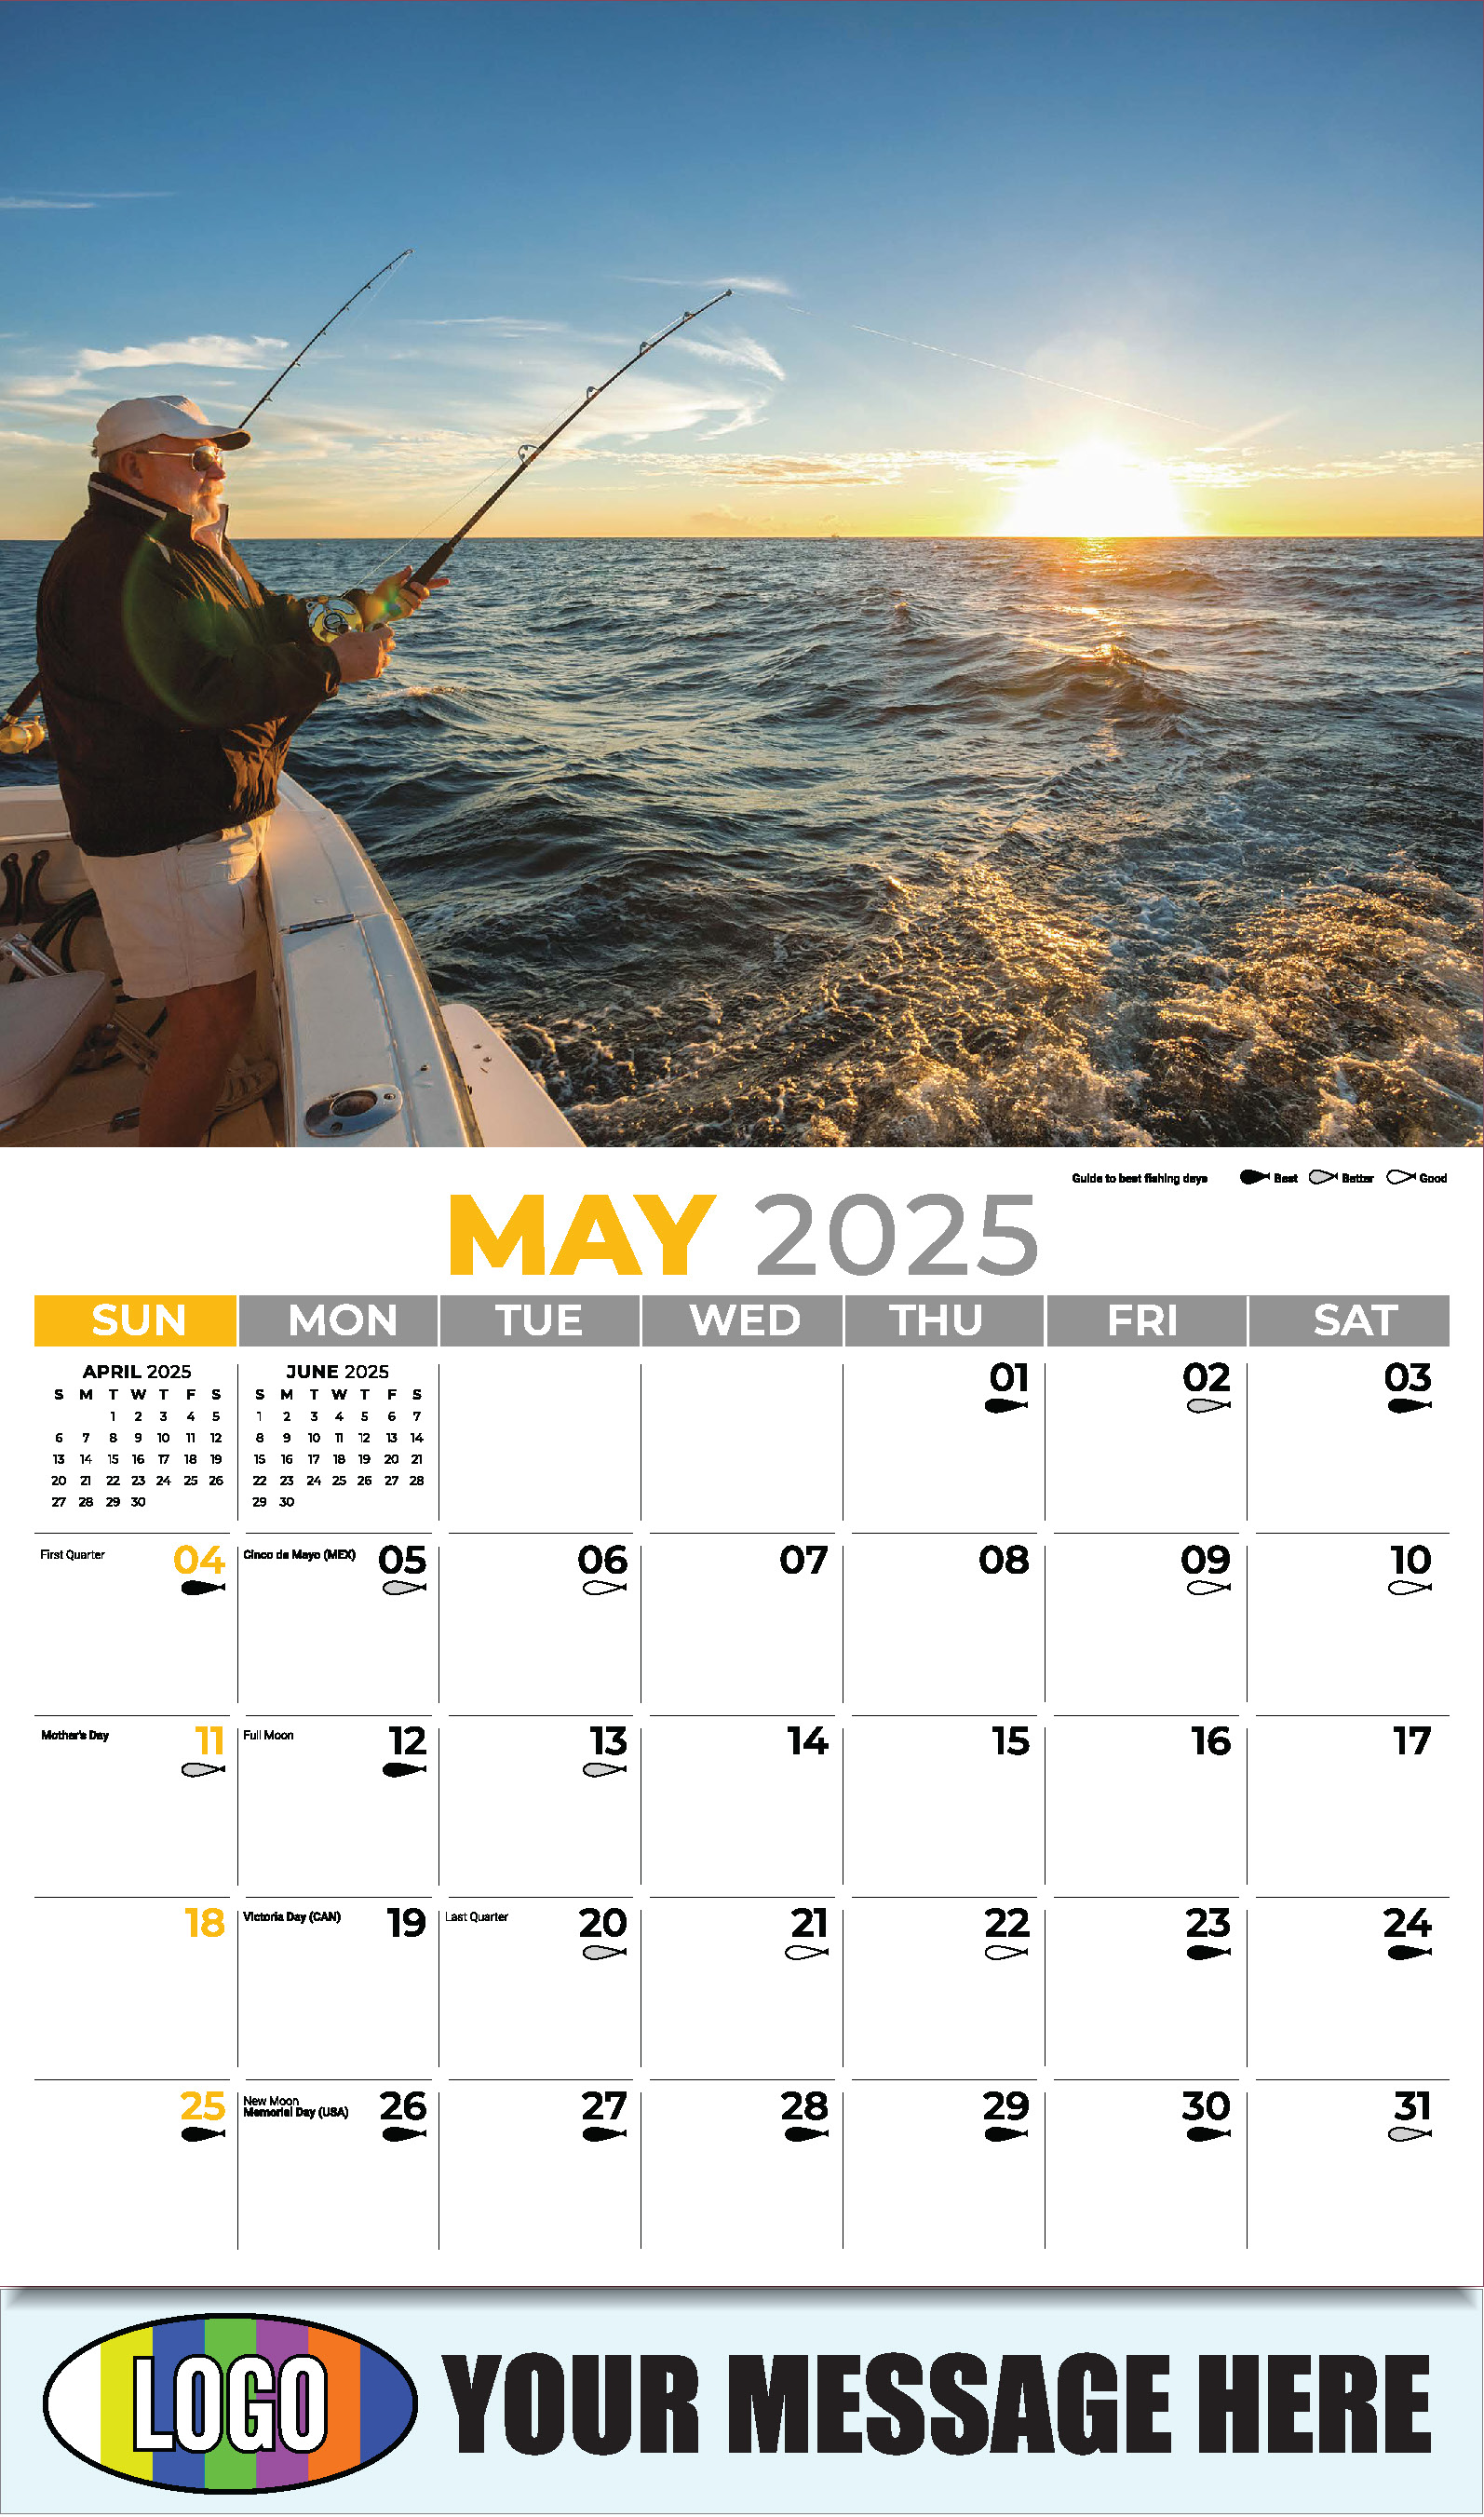 Fishing and Hunting 2025 Business Promotion Calendar - May